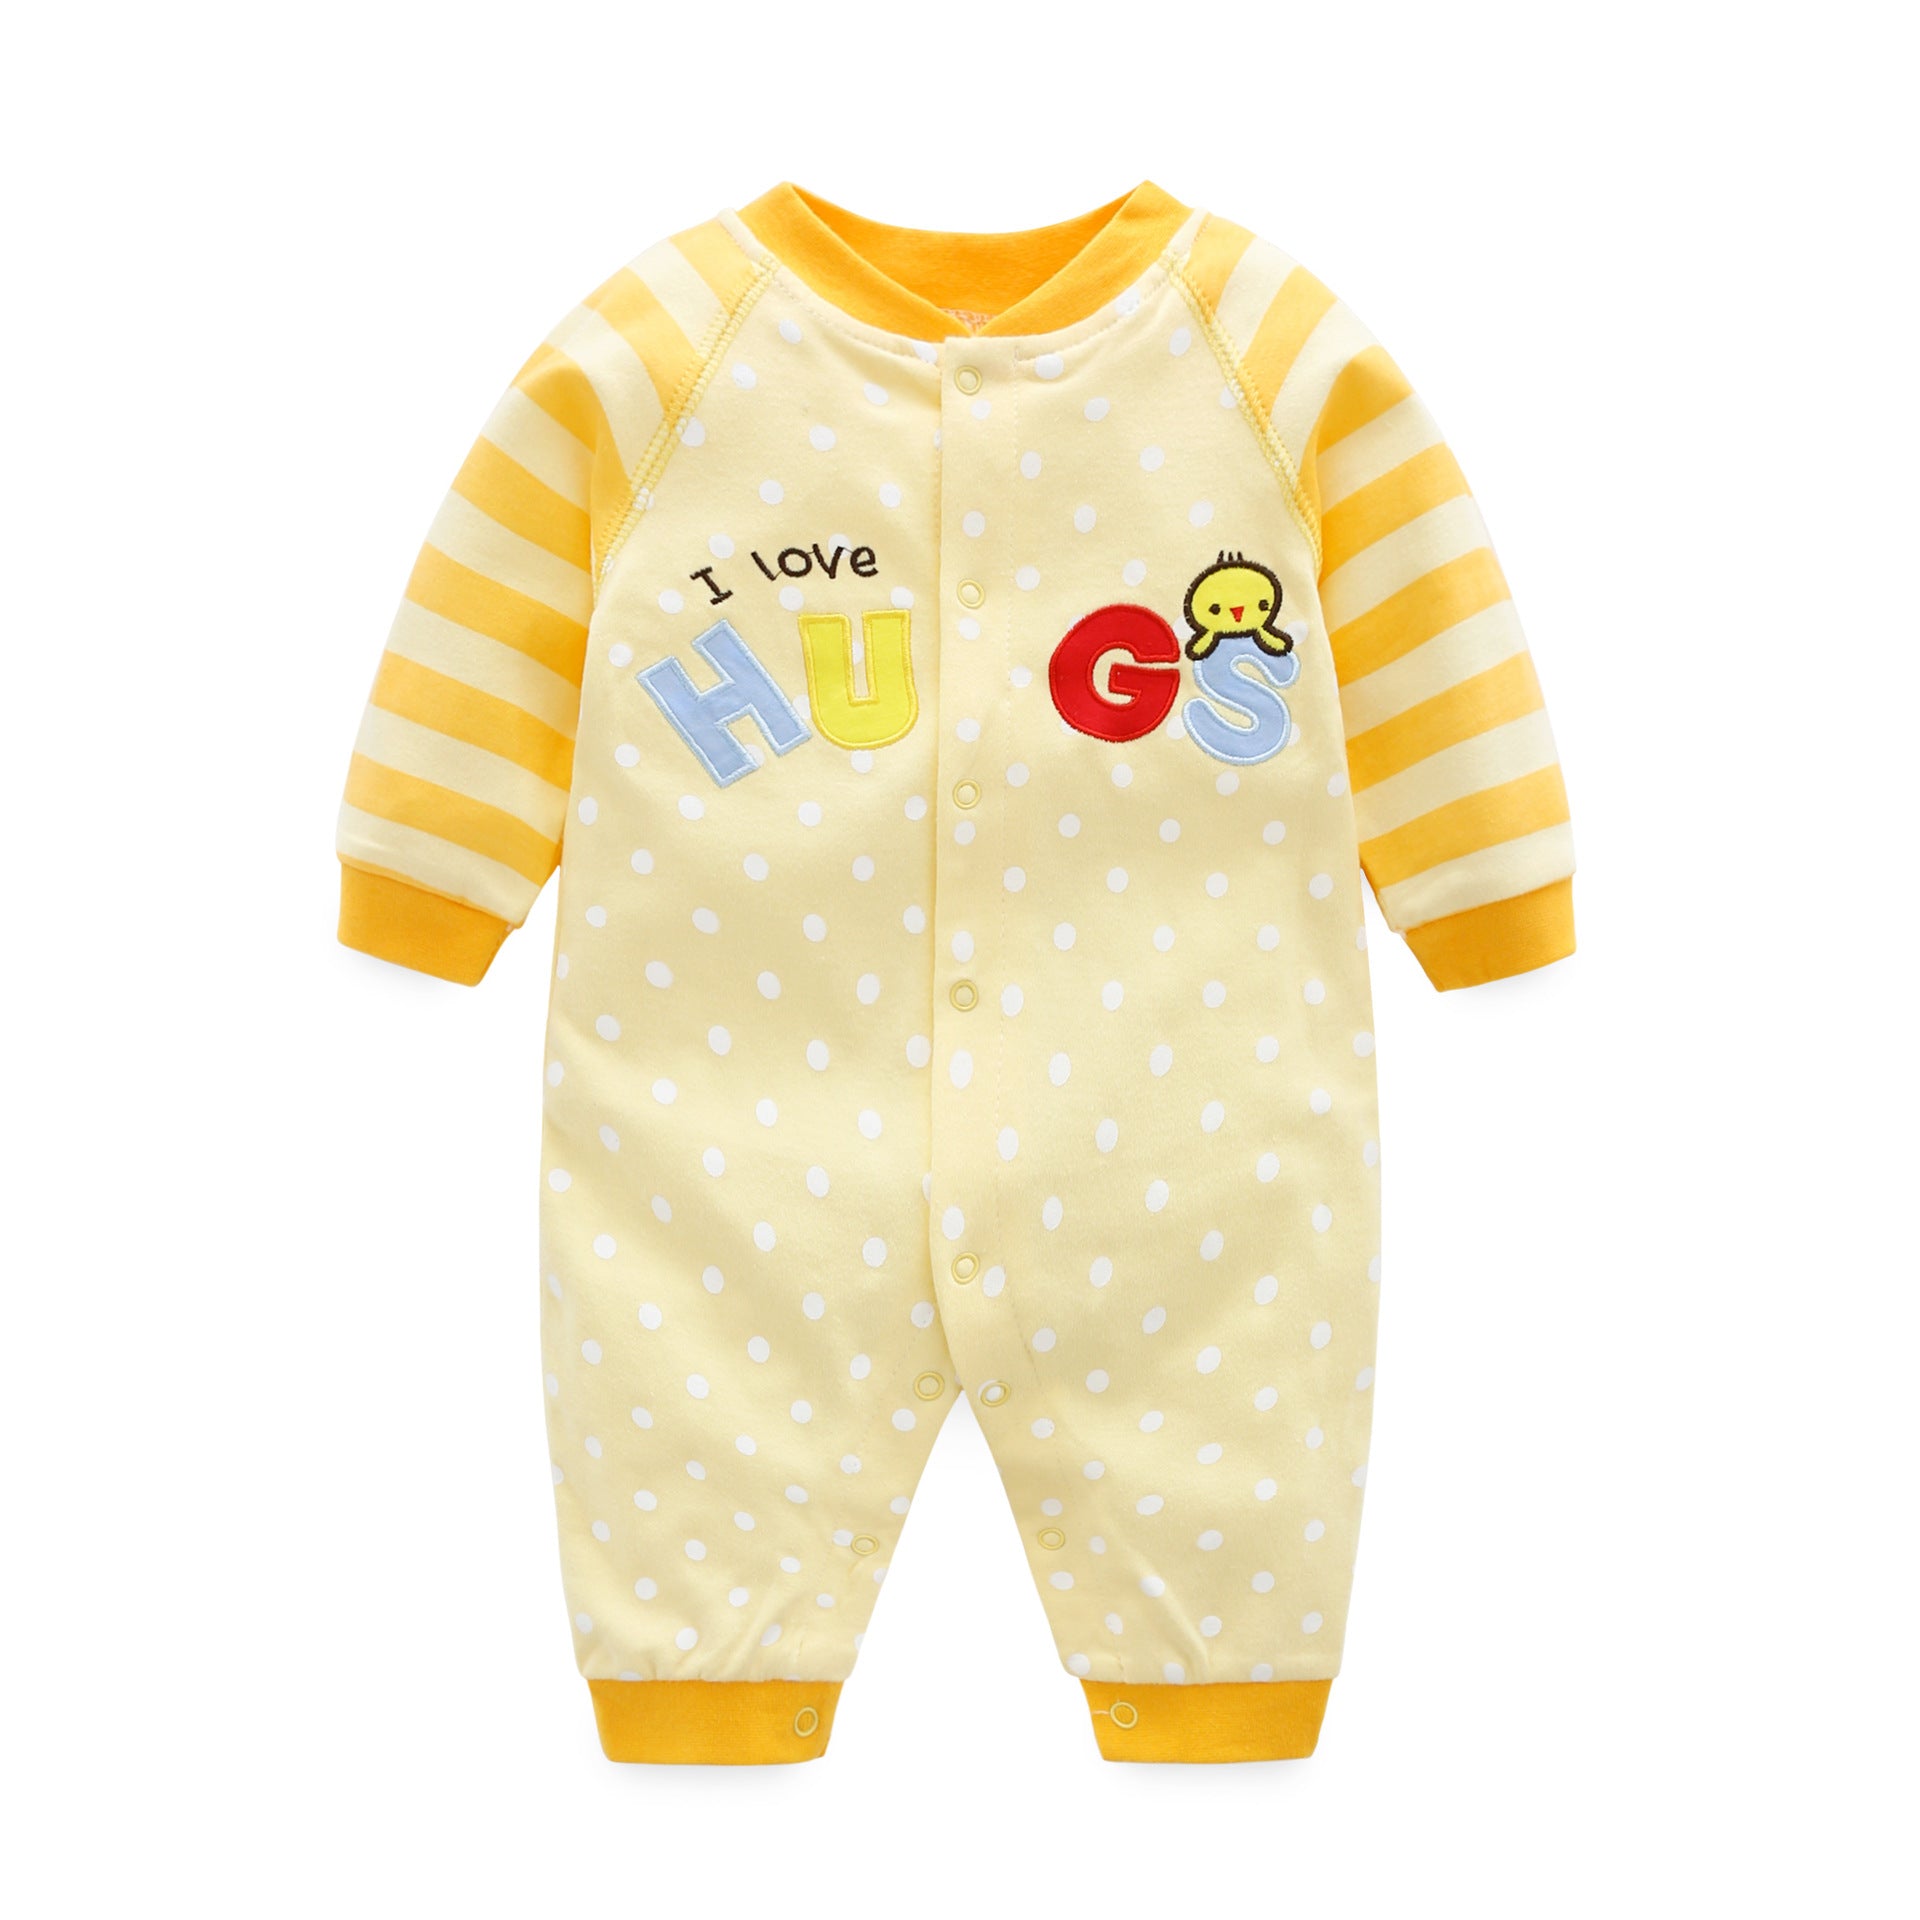 Baby Onesies: Adorable and Comfortable One-Piece Outfits for Infants